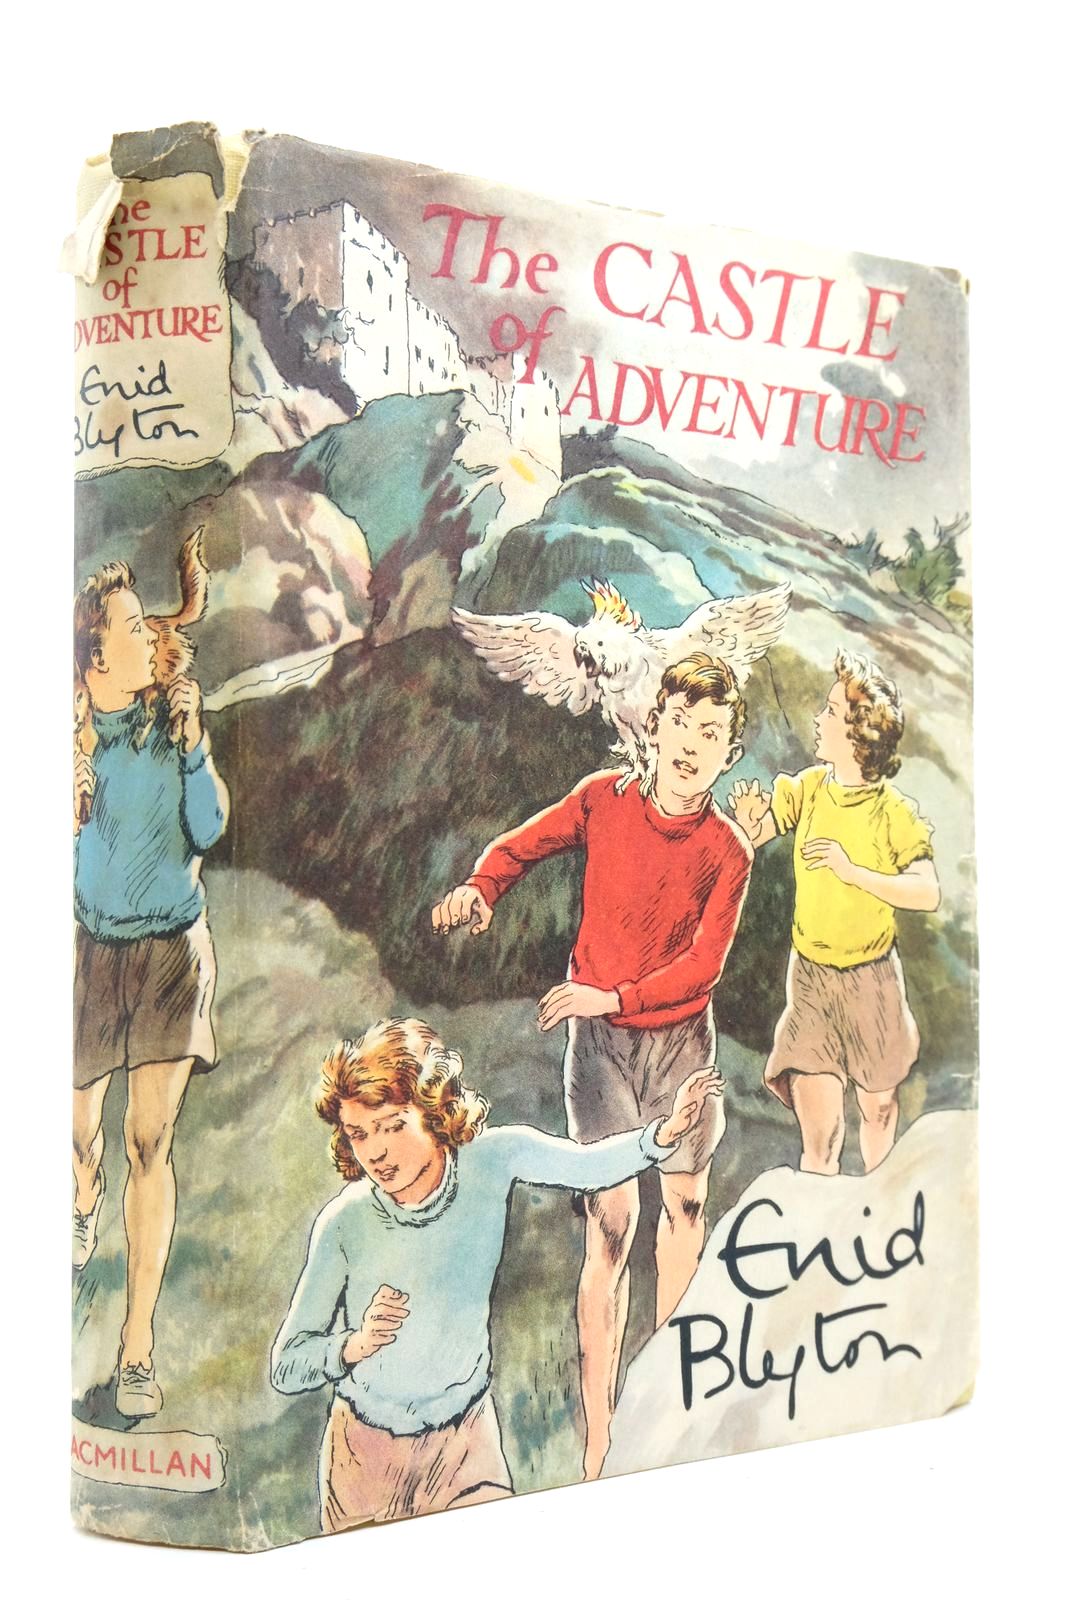 Photo of THE CASTLE OF ADVENTURE written by Blyton, Enid illustrated by Tresilian, Stuart published by Macmillan &amp; Co. Ltd. (STOCK CODE: 2140460)  for sale by Stella & Rose's Books